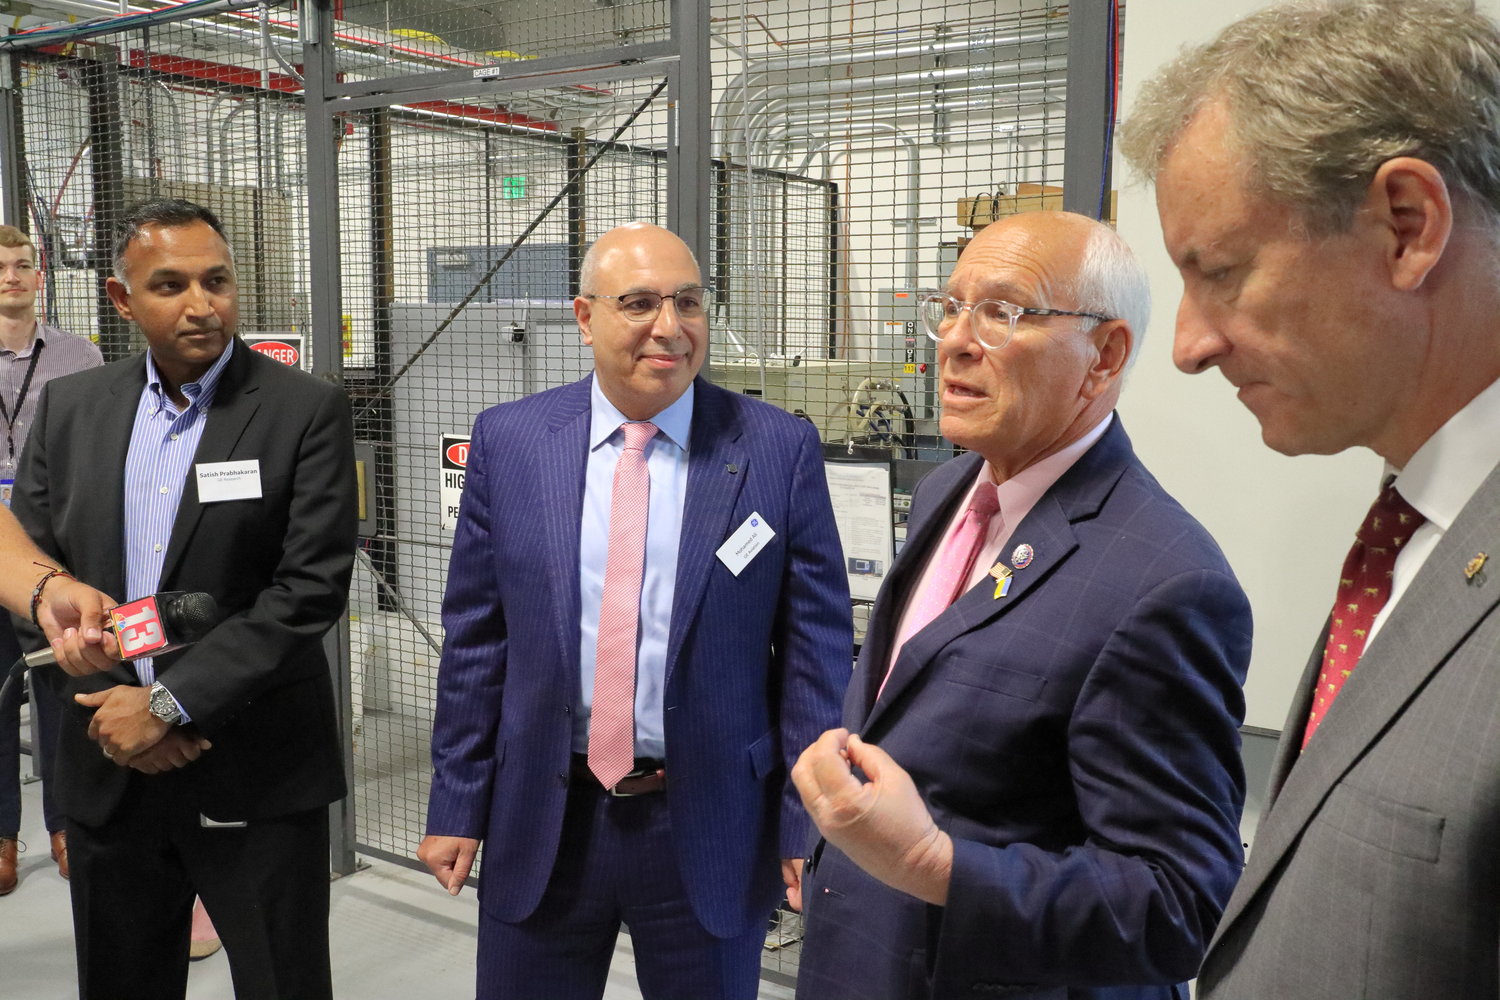 From left, Satish Prabhakaran of GE Research, Mohamed Ali of GE Aviation, U.S. Rep. Paul Tonko, D-Amsterdam, and U.S. Rep. Matt Cartwright, D-Pennsylvania, are shown during a tour of GE Research‚Äôs headquarters in Niskayuna on Wednesday, Aug. 17.